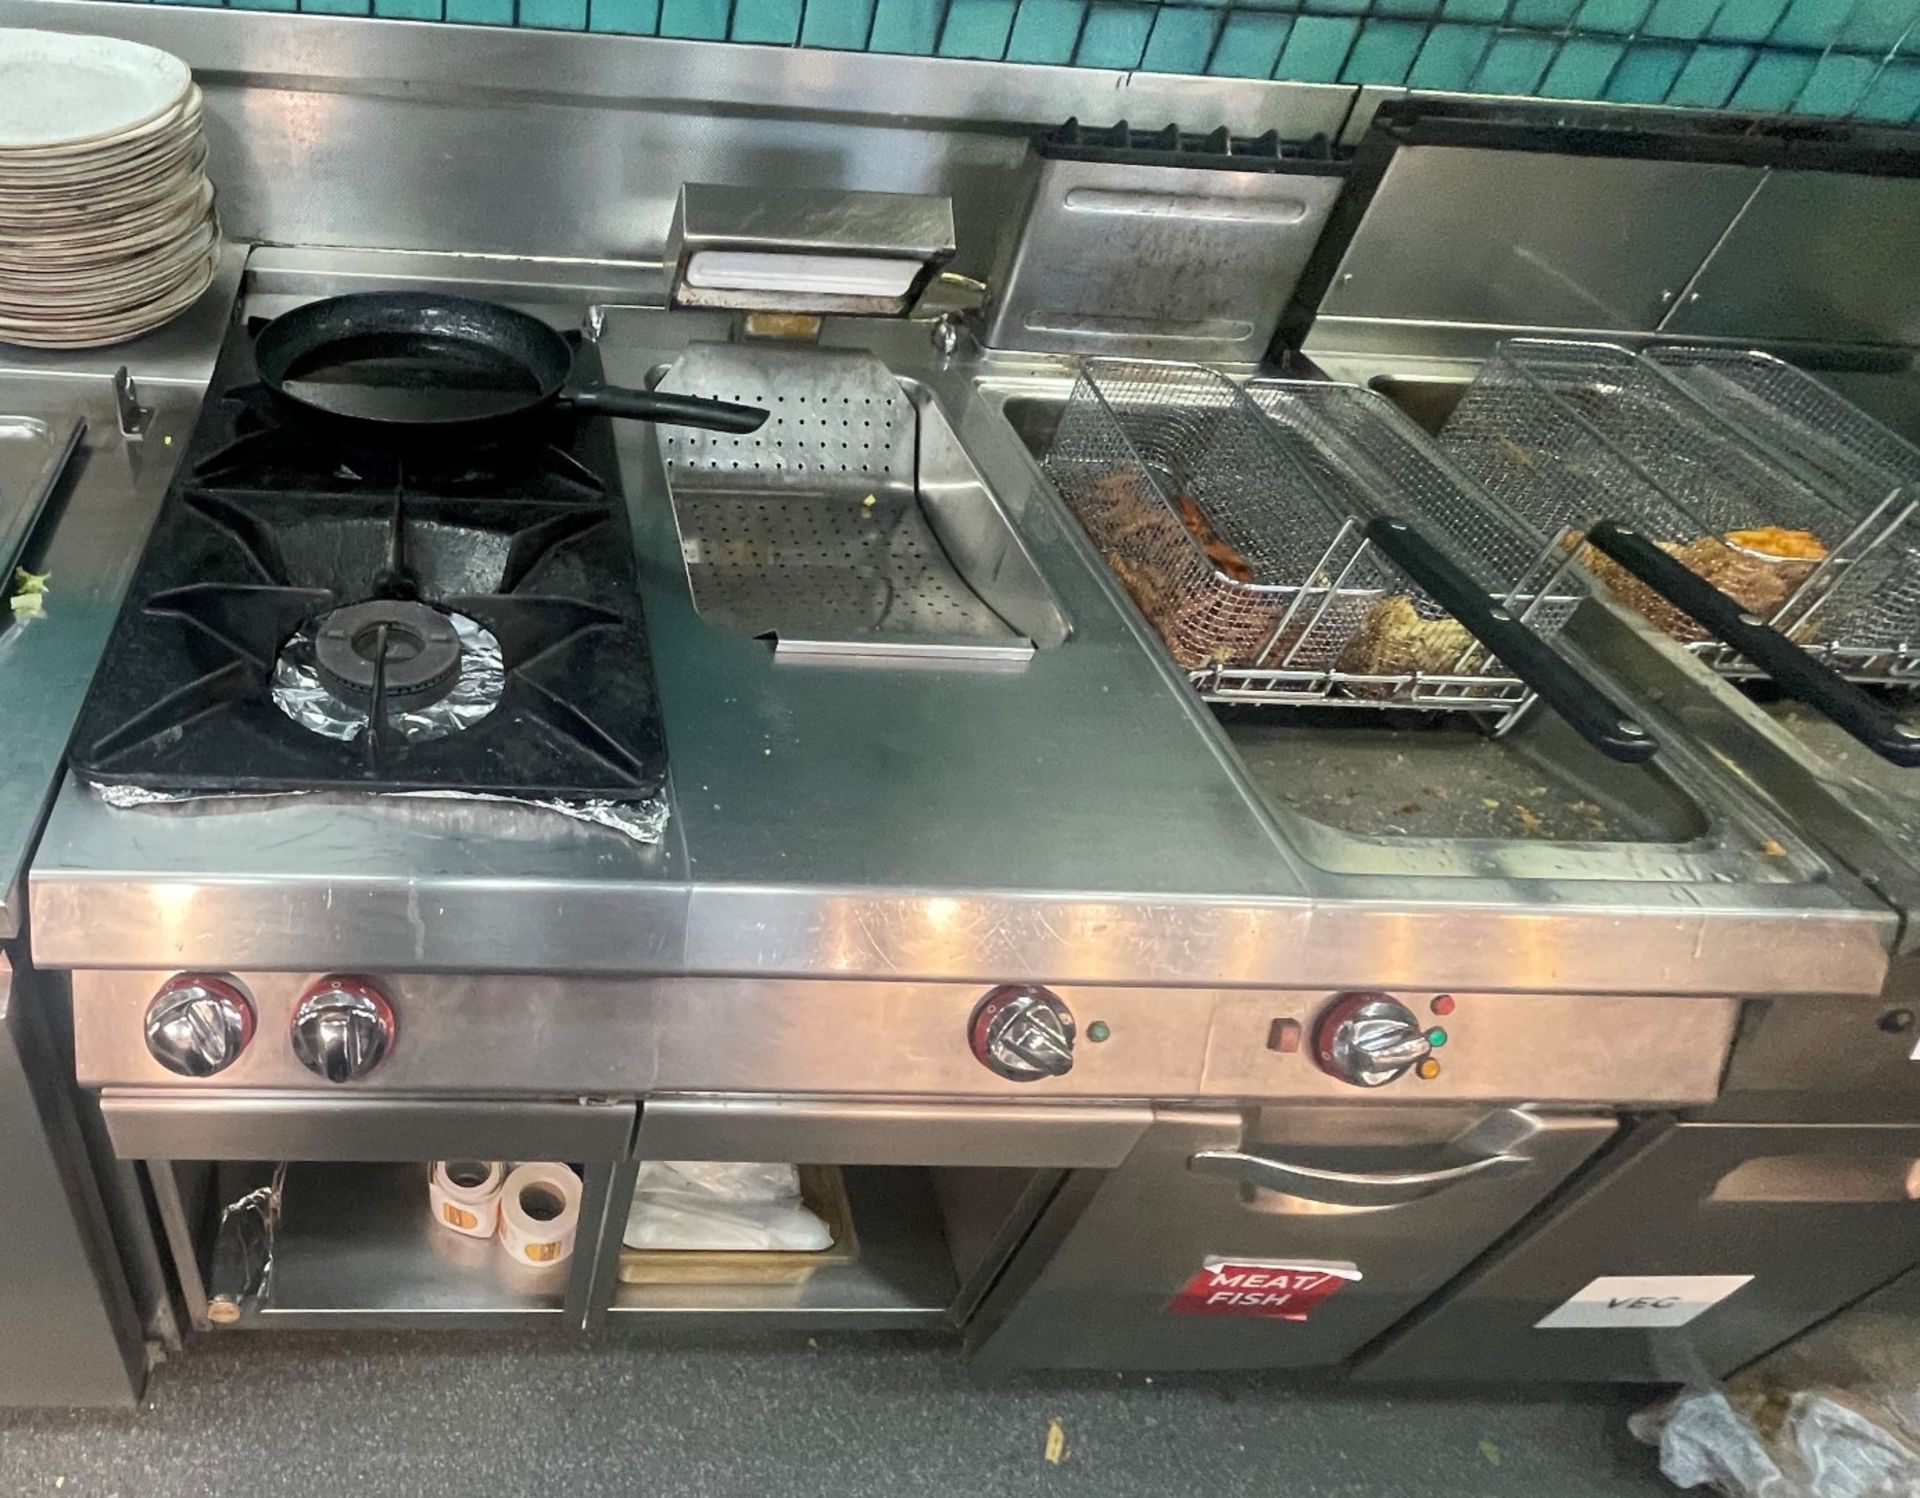 1 x Angelo Po Cook Station Featuring Single Tank Fryer, Two Burner Cooker and Chip Scuttle - Image 8 of 8